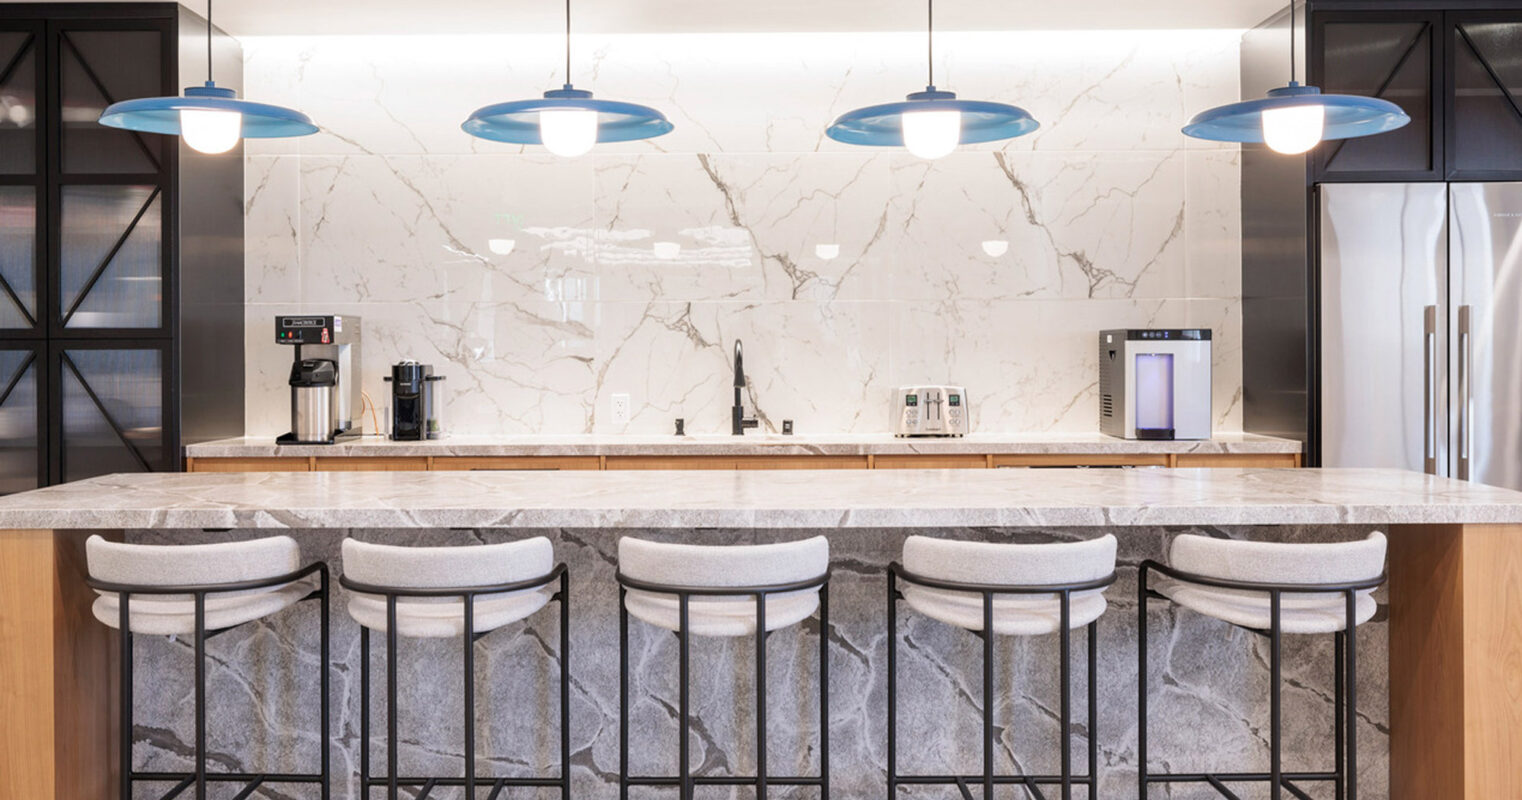 Modern kitchen featuring a white marble backsplash, contrasting with a sleek gray countertop. Overhead, blue pendant lights add a pop of color above the bar-style seating with elegant, gray upholstered stools.